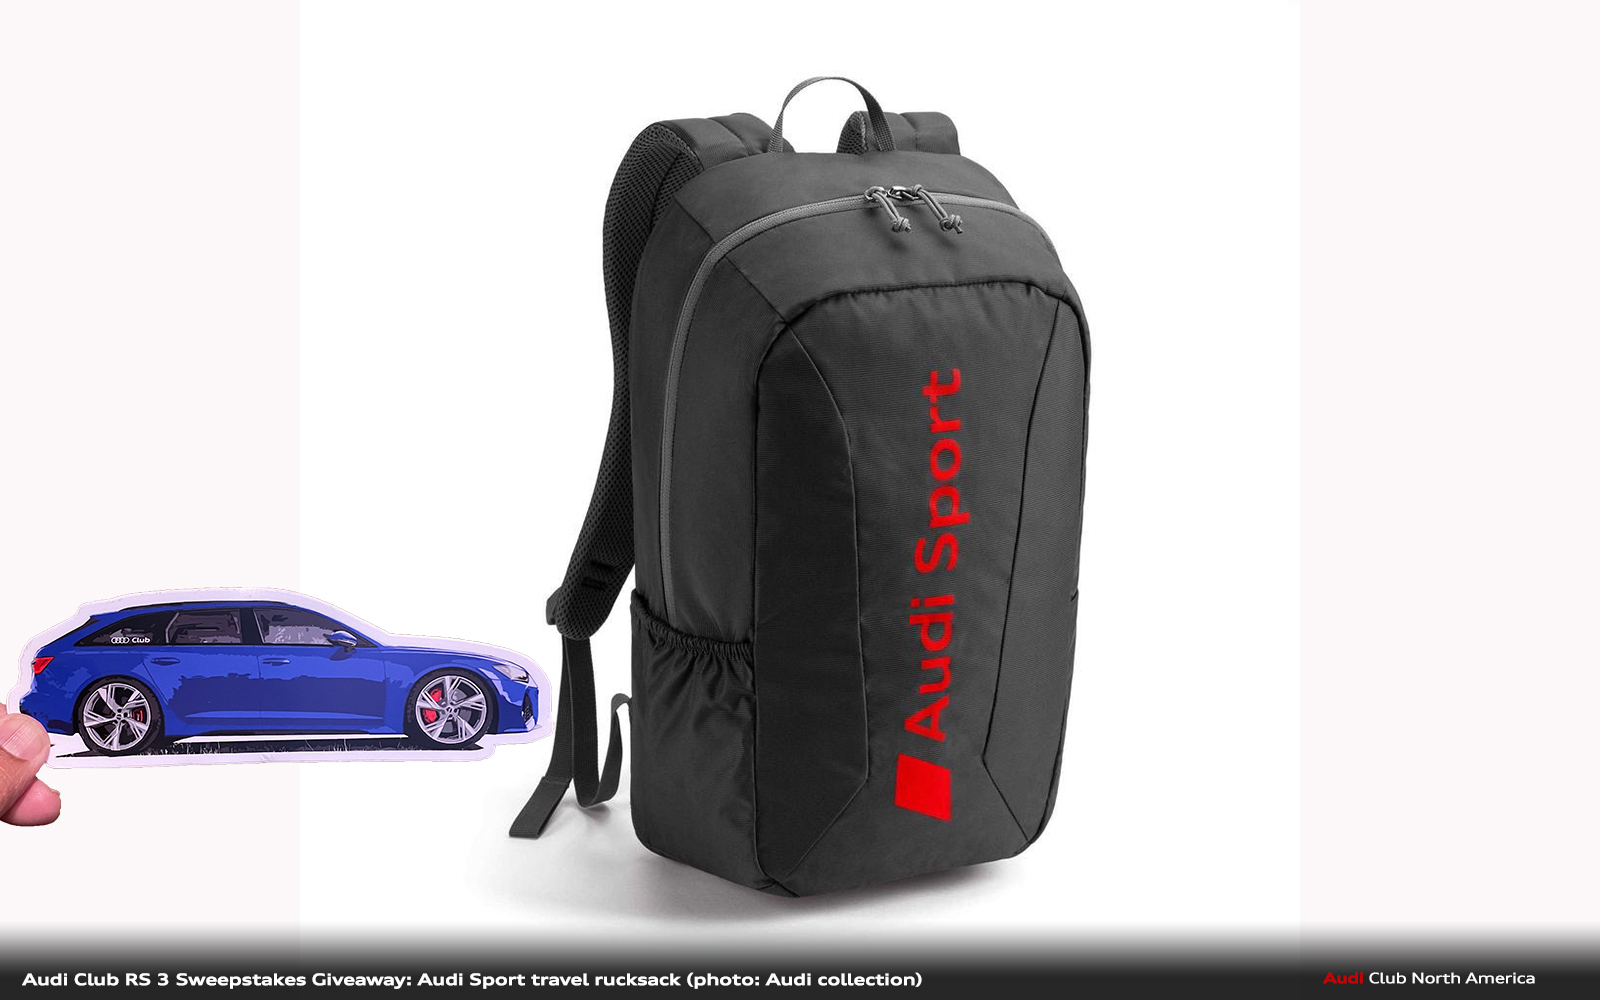 One Wins This Audi Sport Travel Rucksack and Everyone Gets an Audi RS 6  Tribute Decal! - Audi Club North America